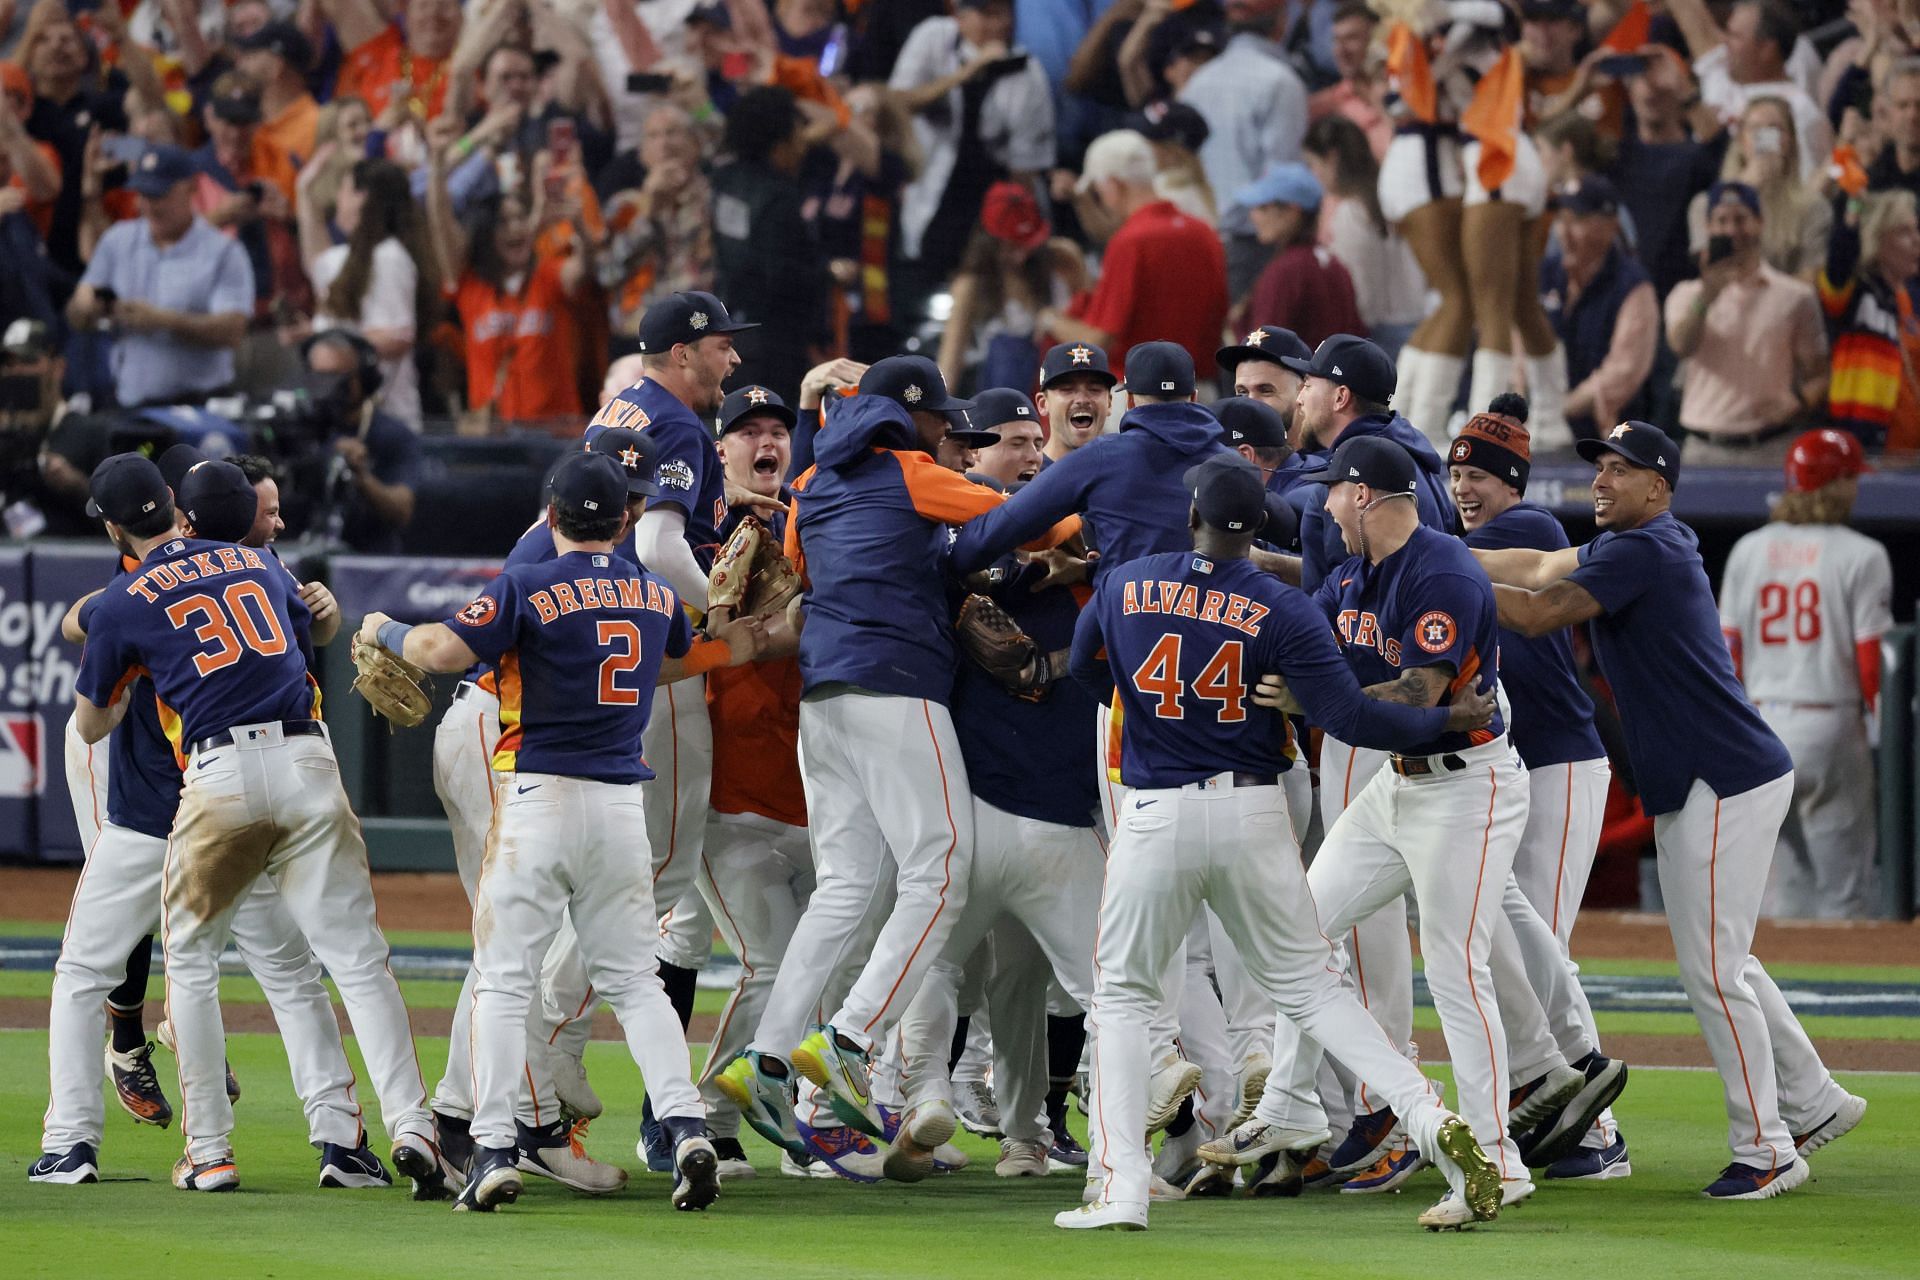 Houston Astros Spring Training Tickets: How to buy, best prices and more